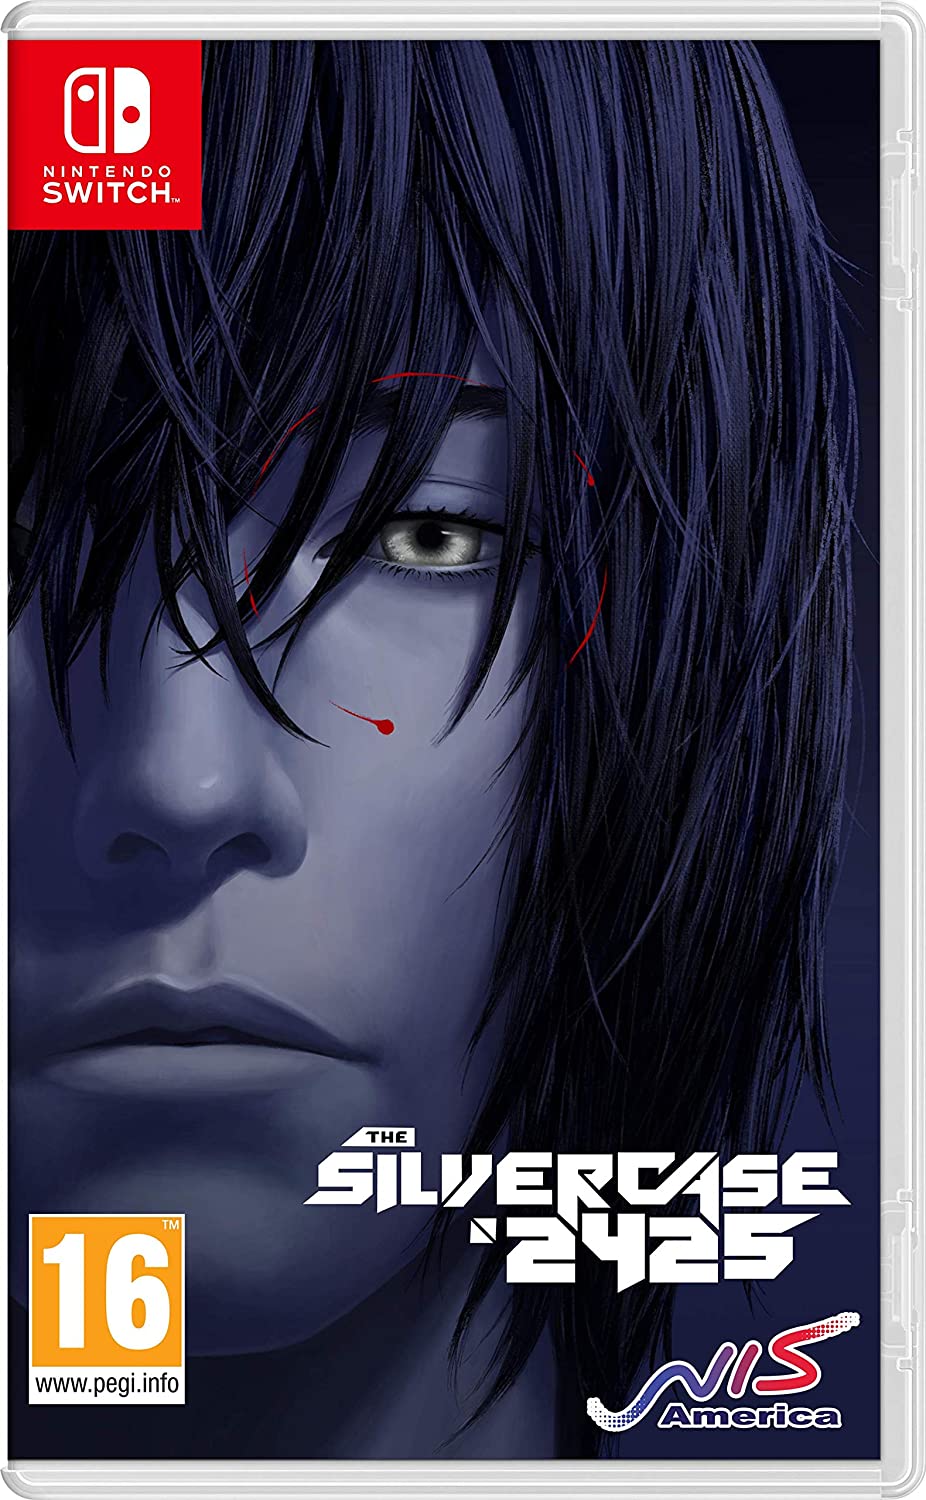 The Silver Case 2425 (Édition Deluxe) Nintendo Switch